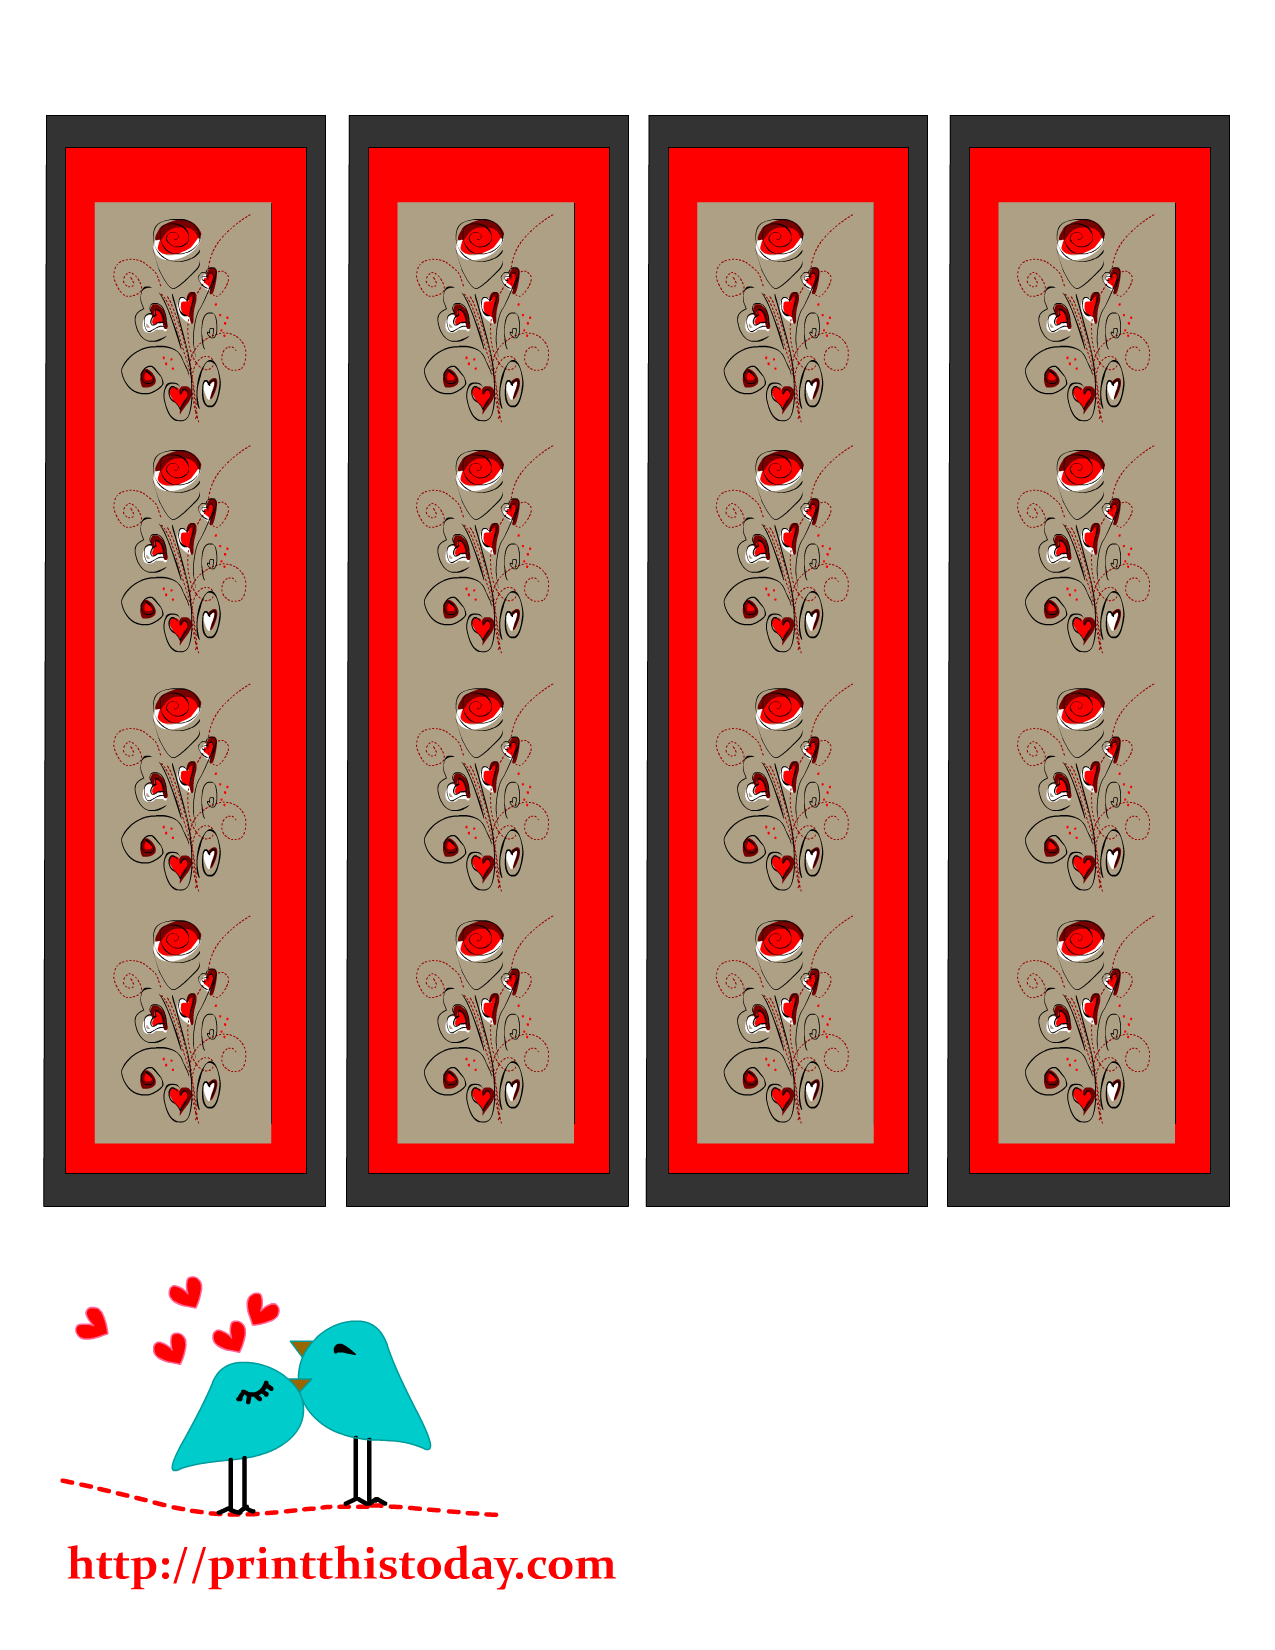 Valentine bookmarks with hearts and flowers design